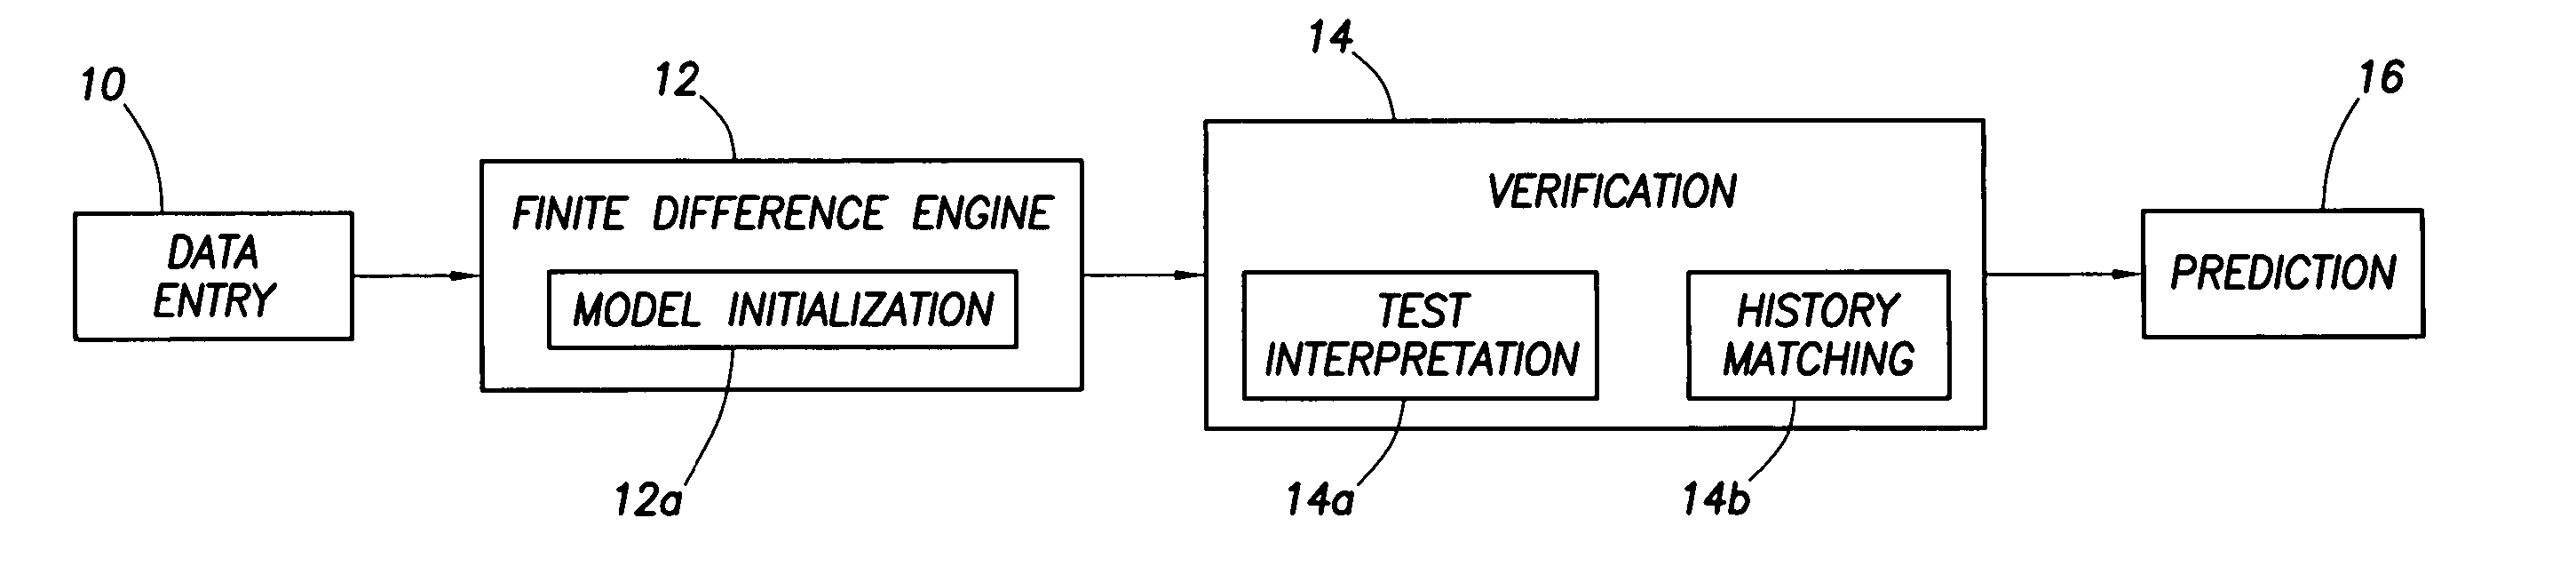 Gas reservoir evaluation and assessment tool method and apparatus and program storage device